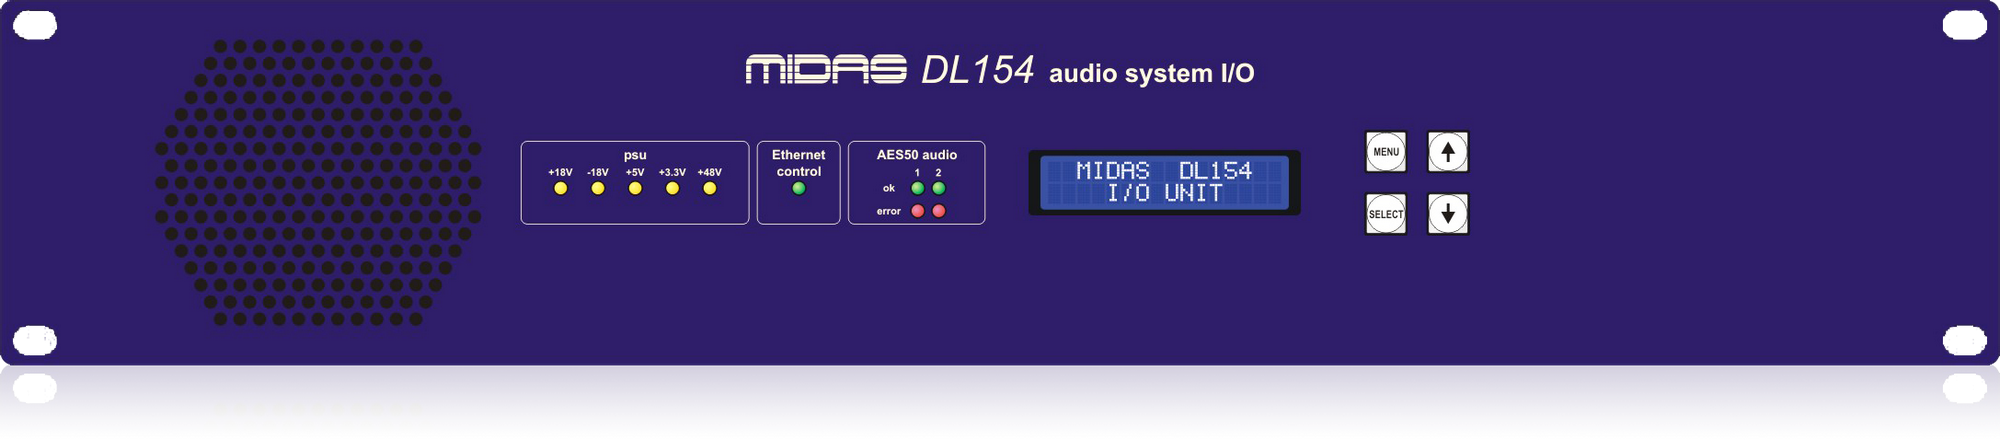 Midas DL154 - 8 Input, 16 Output Stage Box with 8 Midas Microphone Preamplifiers